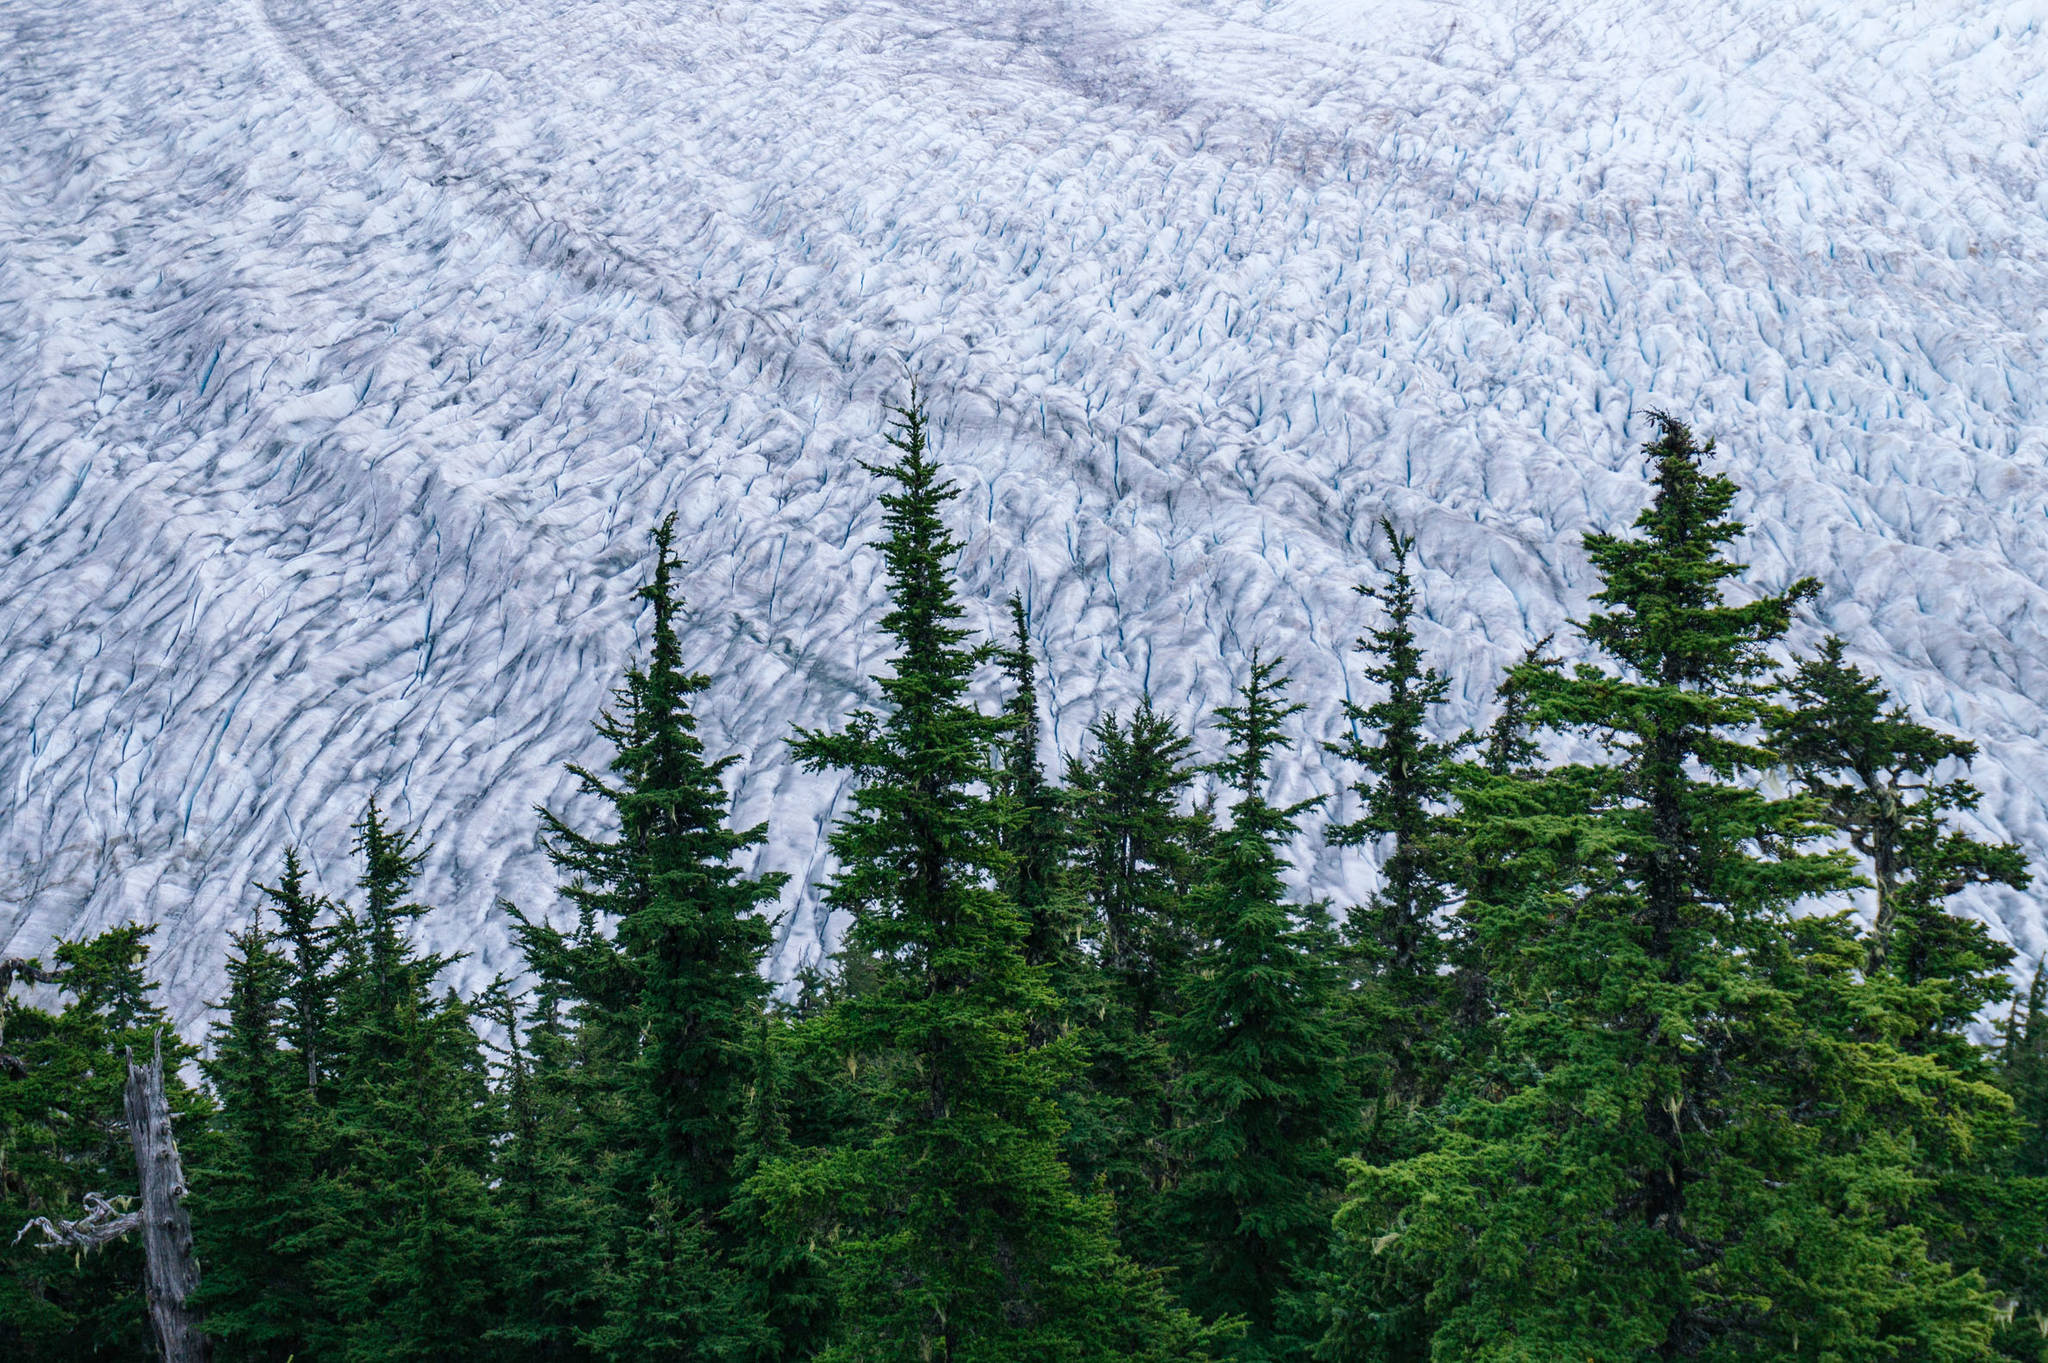 Nothing but Mendenhall ice behind the Mt. McGinnis treeline. (Gabe Donohoe | For Juneau Empire)